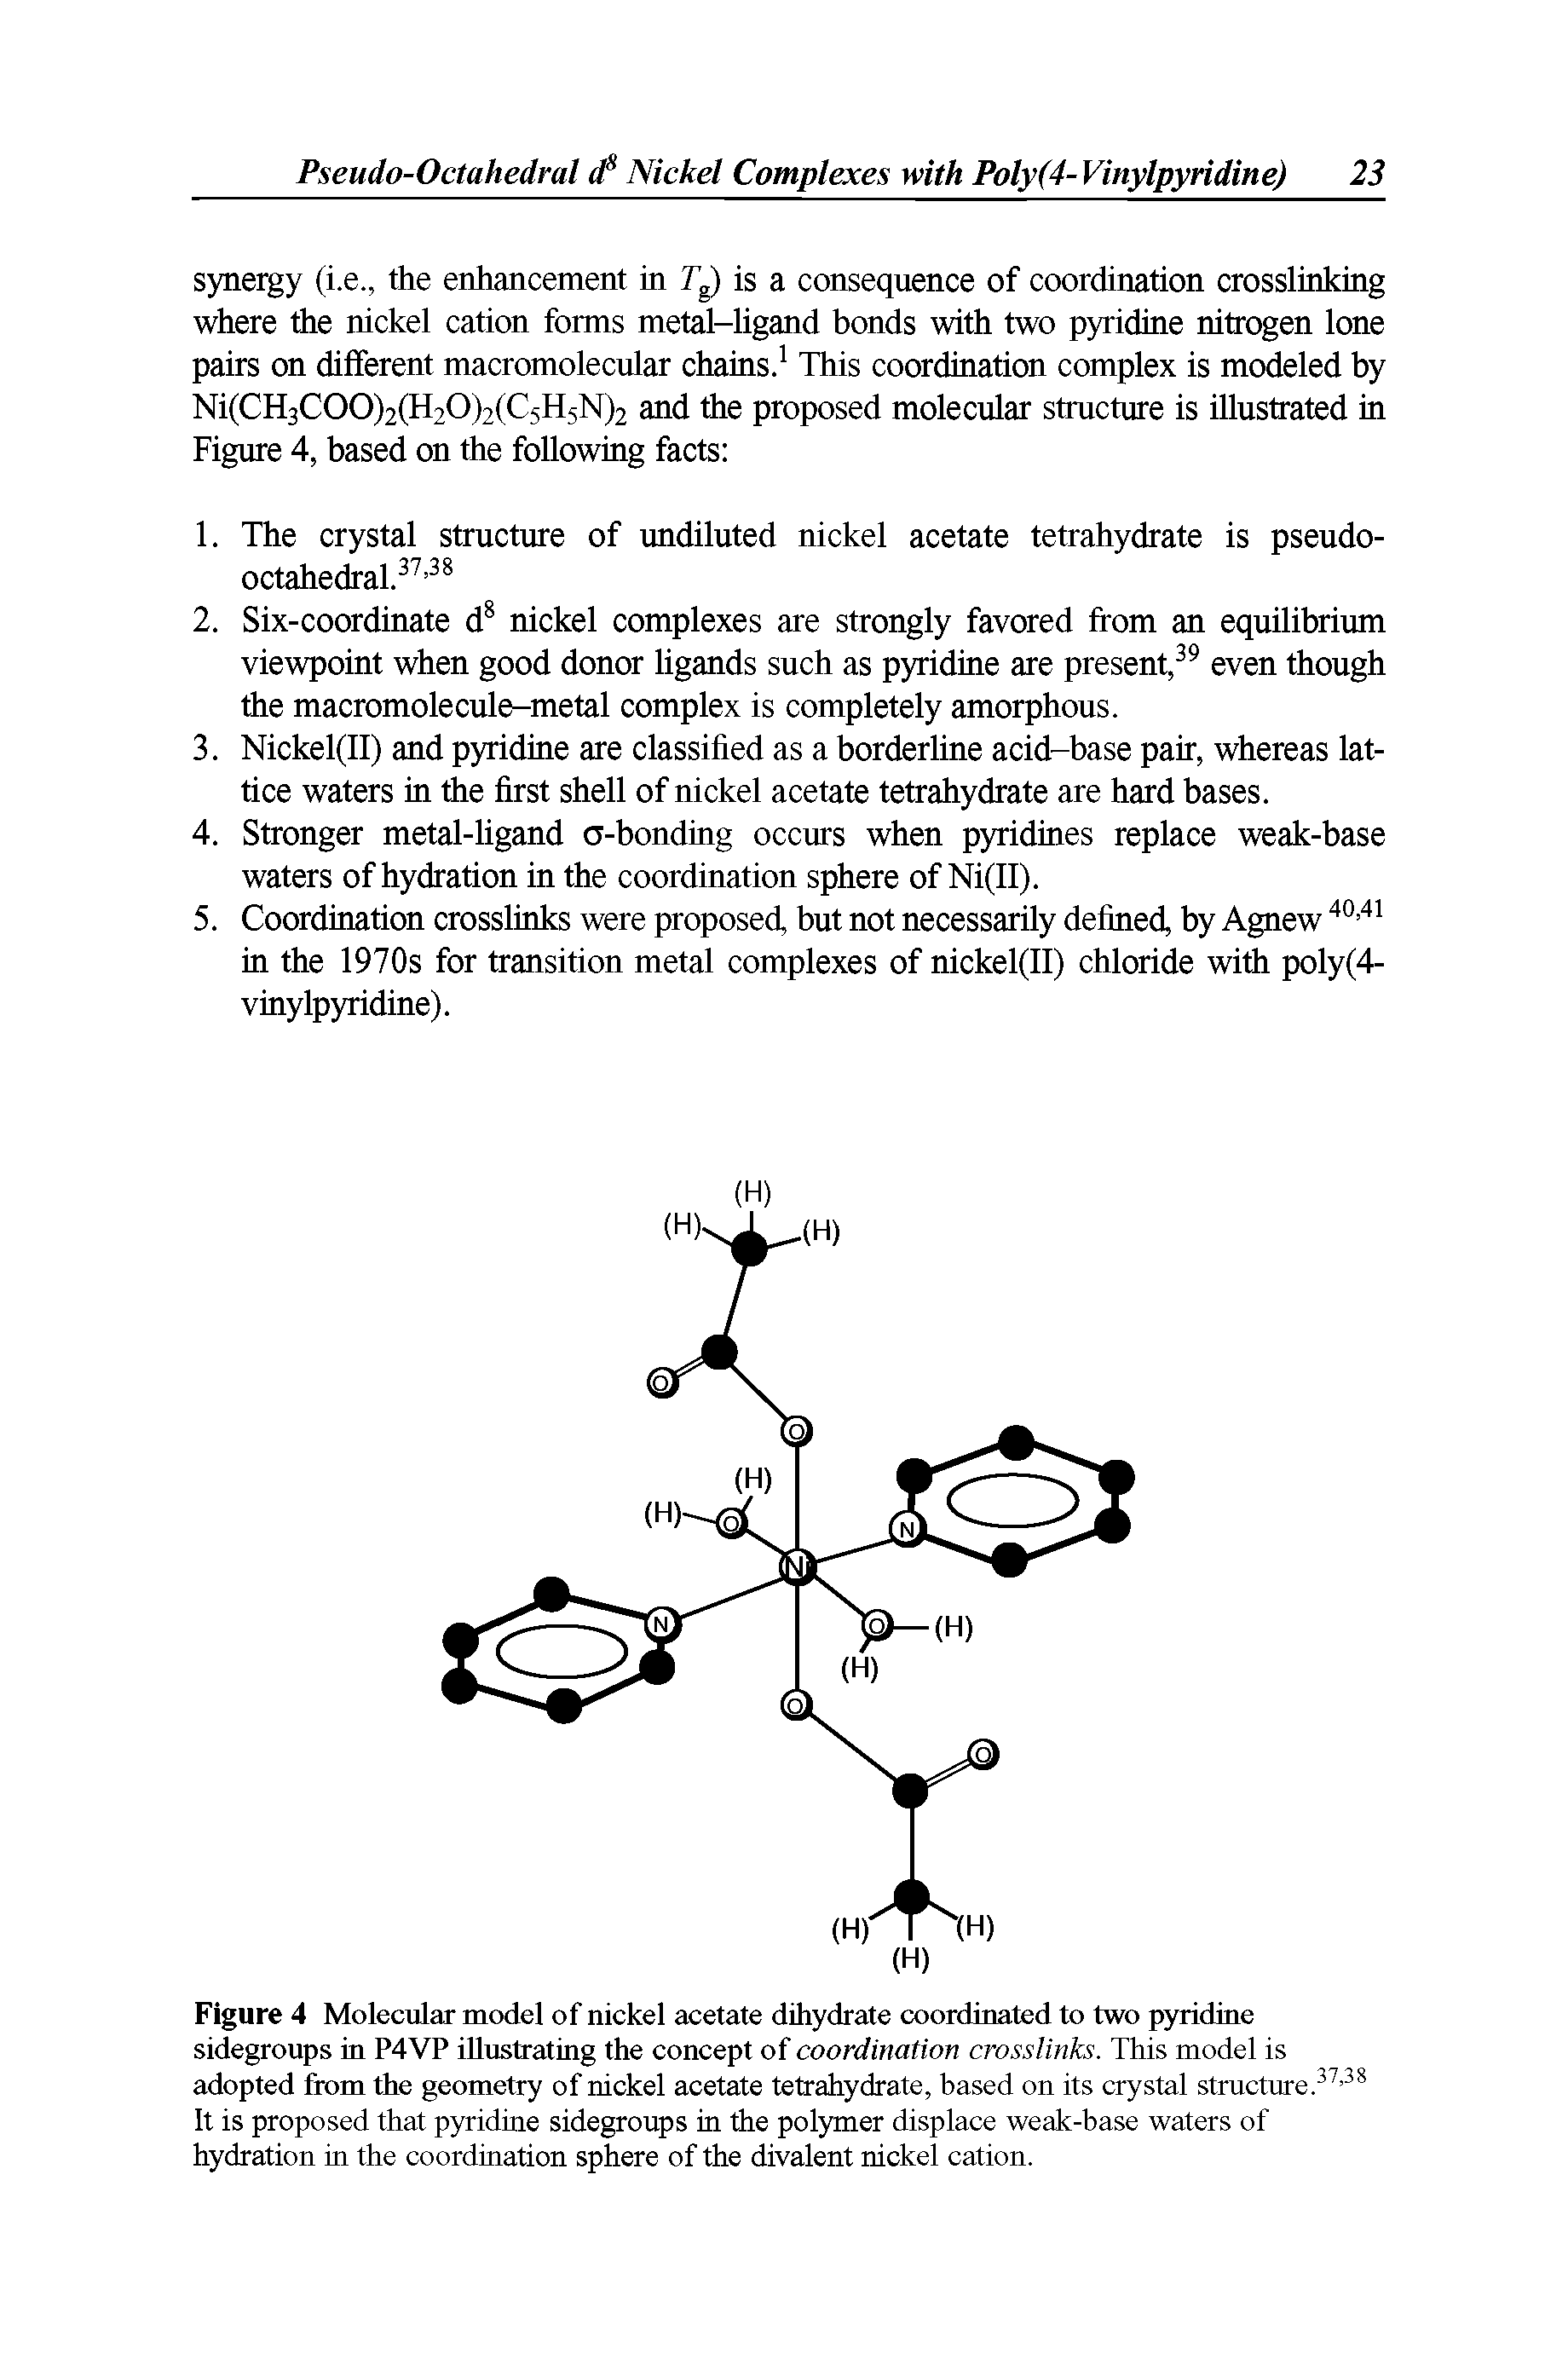 Figure 4 Molecular model of nickel acetate dihydrate coordinated to two pyridine sidegroups in P4VP illustrating the concept of coordination crosslinks. This model is adopted from the geometry of nickel acetate tetrahydrate, based on its crystal structure. It is proposed that pyridine sidegroups in the polymer displace weak-base waters of hydration in the coordination sphere of the divalent nickel cation.